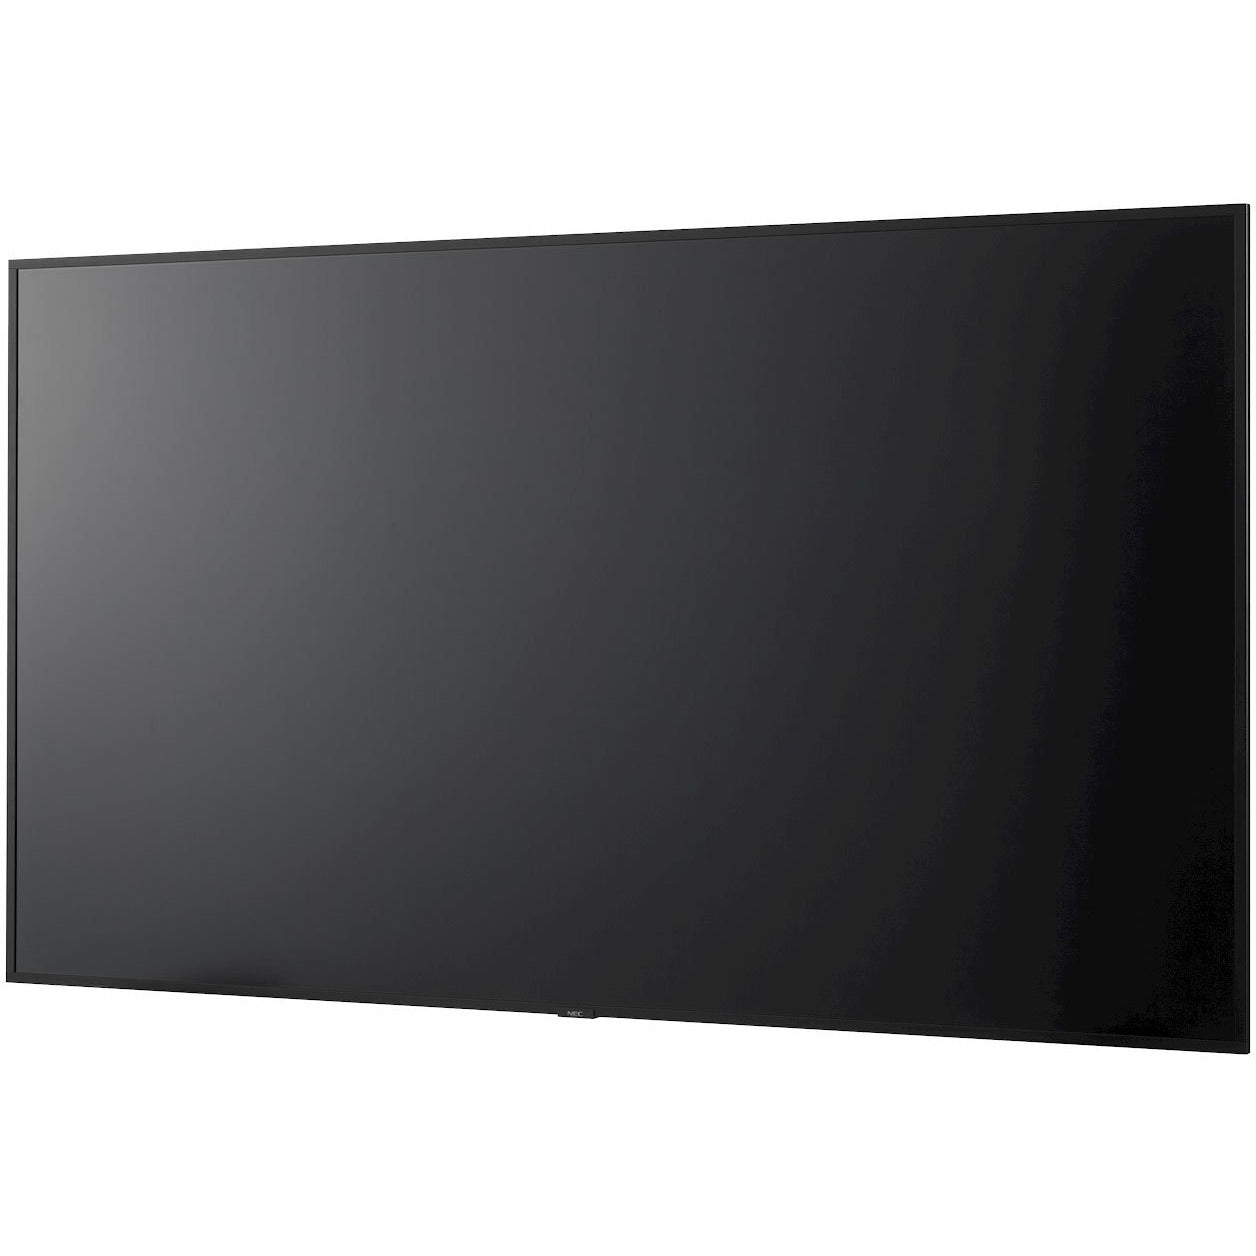 NEC MultiSync® E868 LCD 86" Essential Large Format Display